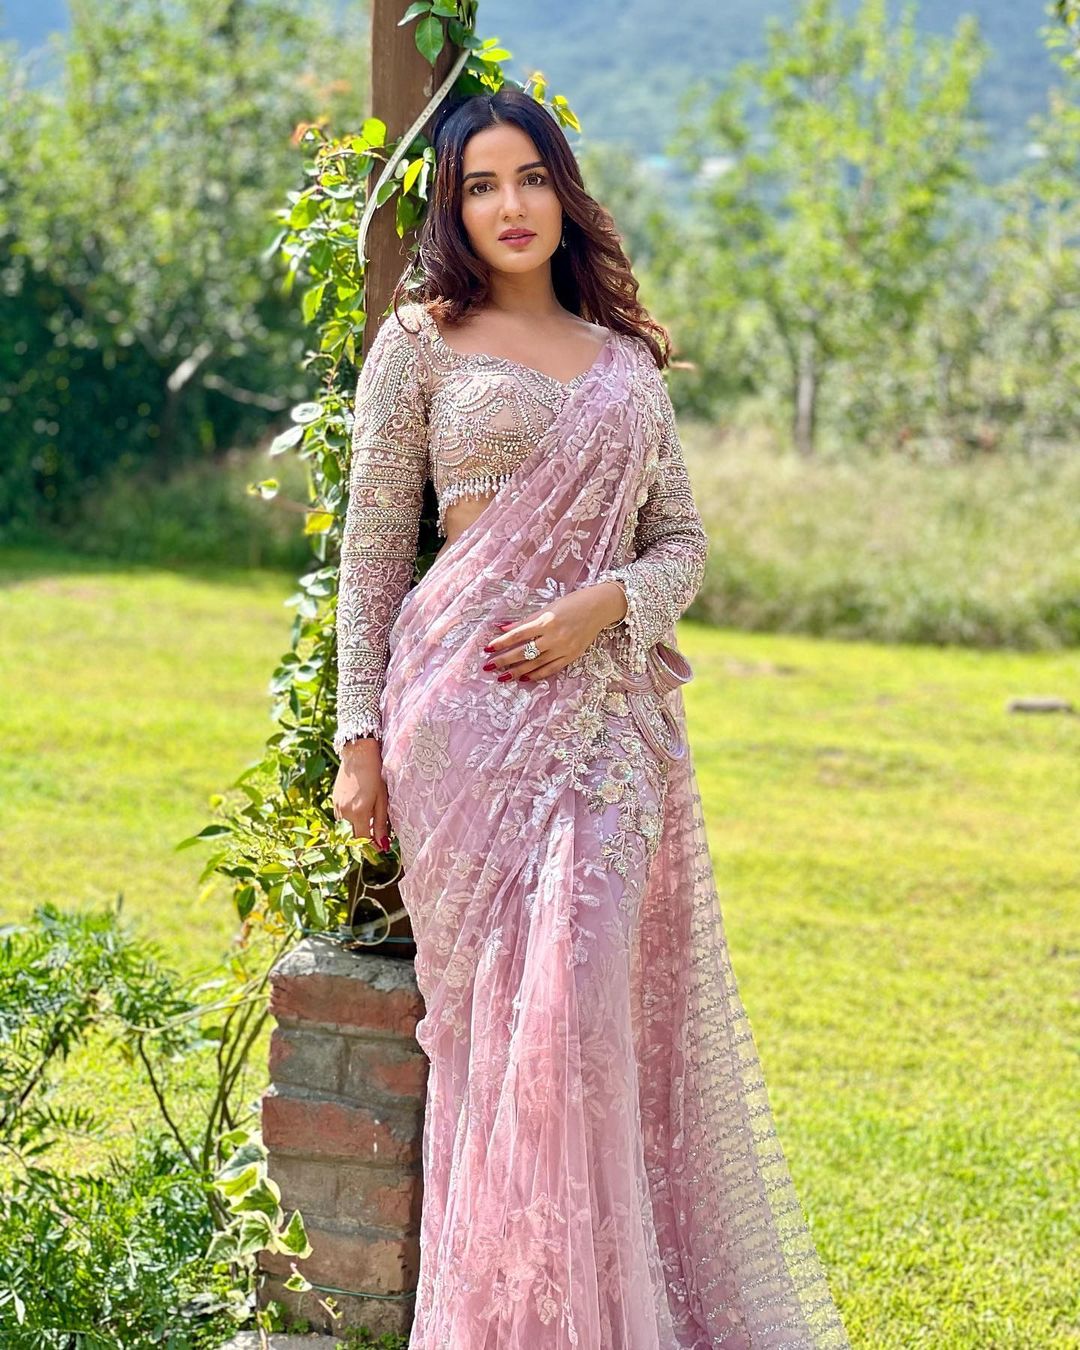 Jasmin Bhasin Is A Vision To Behold In Transparent Lavender Saree ...